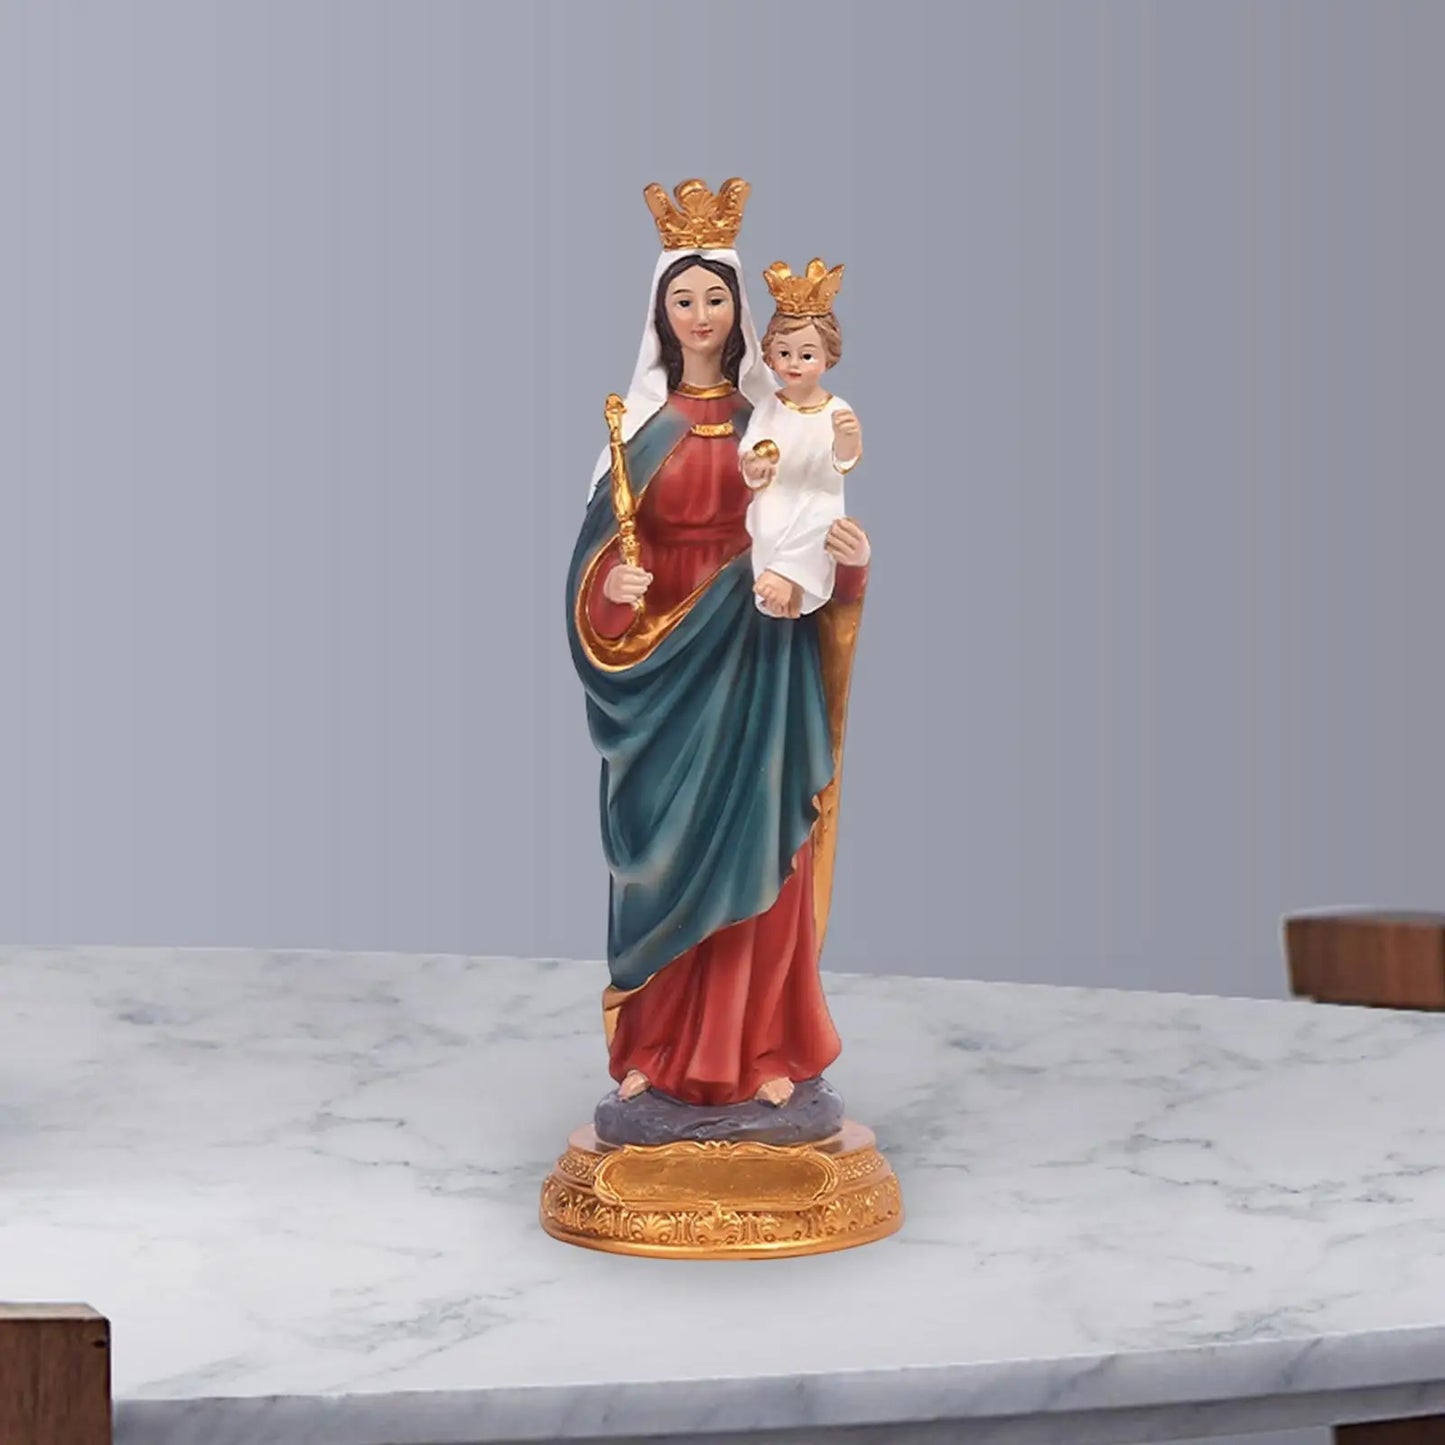 Resin Figurines Jesus Sculpture Wedding Christian Virgin Mother Mary Statue Classical Figures Holding Children Ornaments